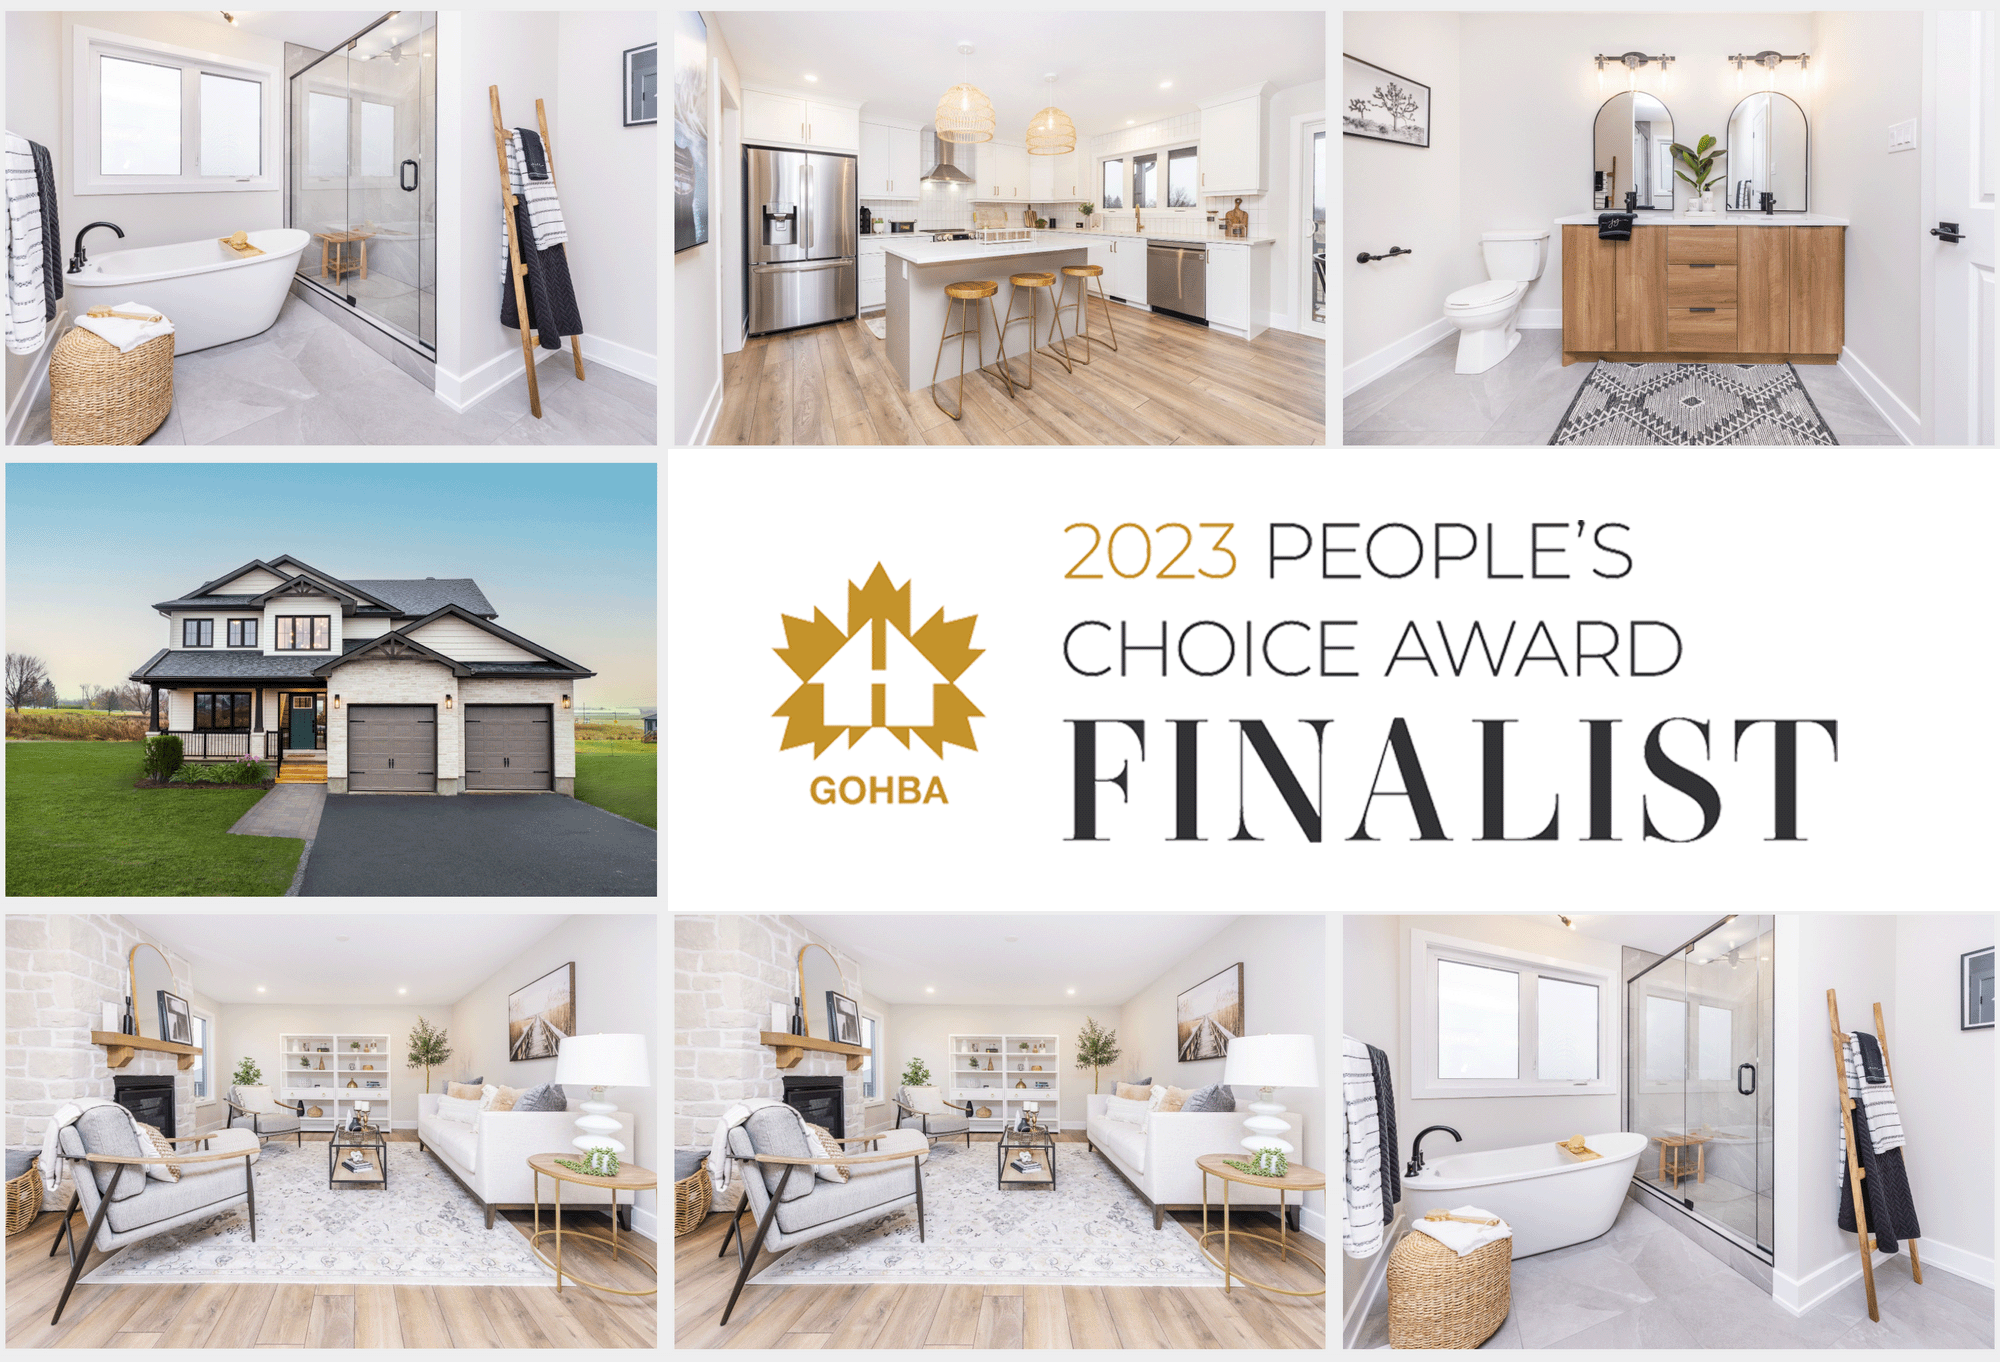 Vote Now for the 'Russell Model' at the GOHBA peoples choice award.🎉